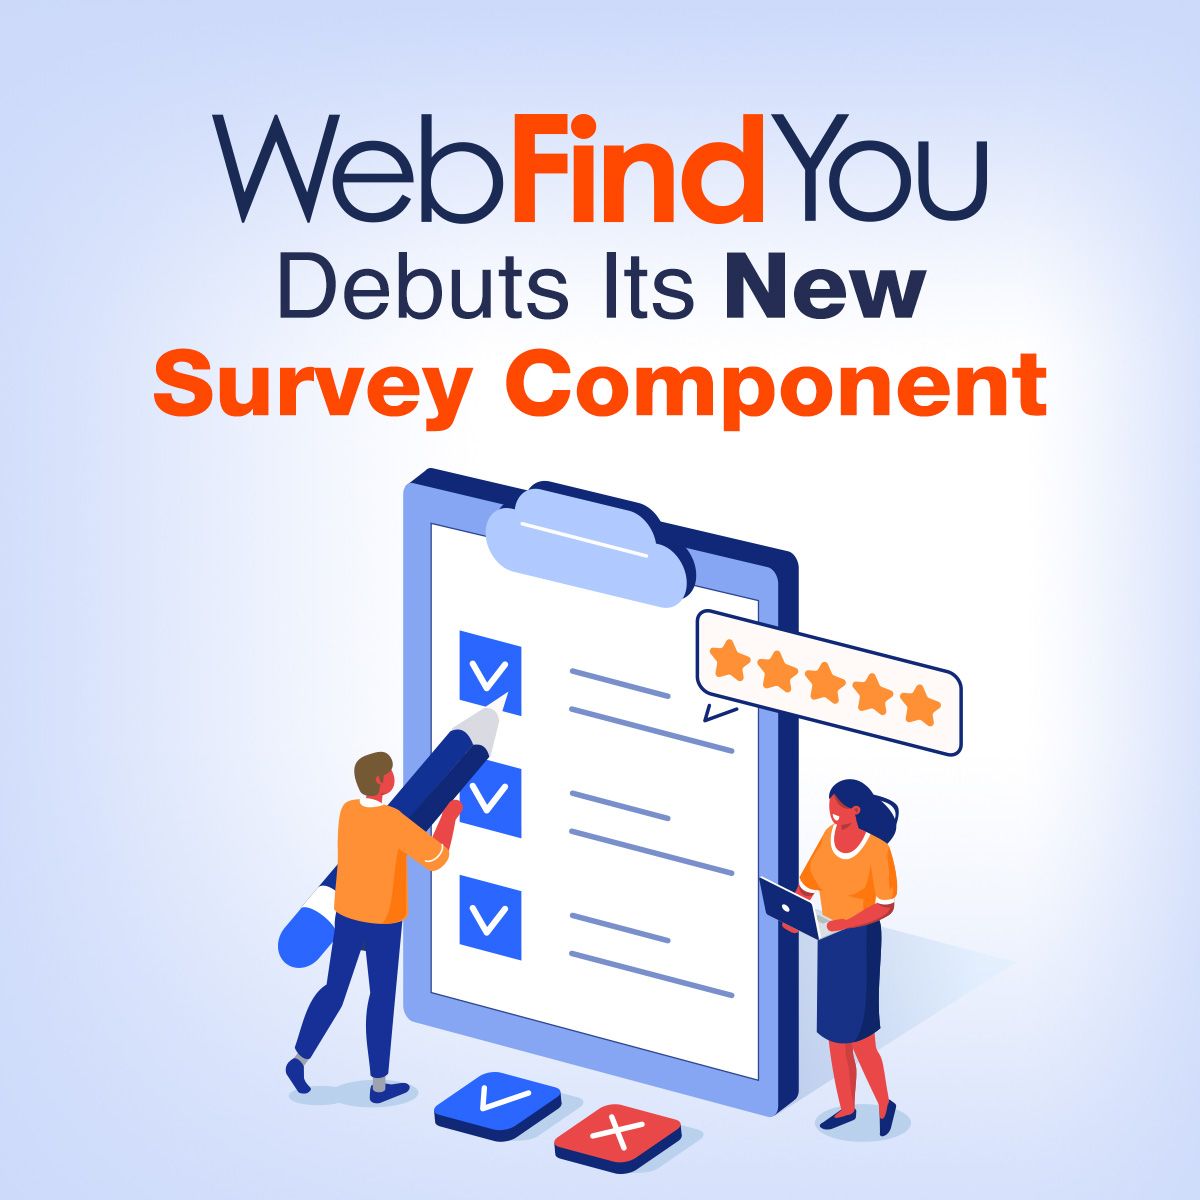 WebFindYou Debuts Its New Survey Component